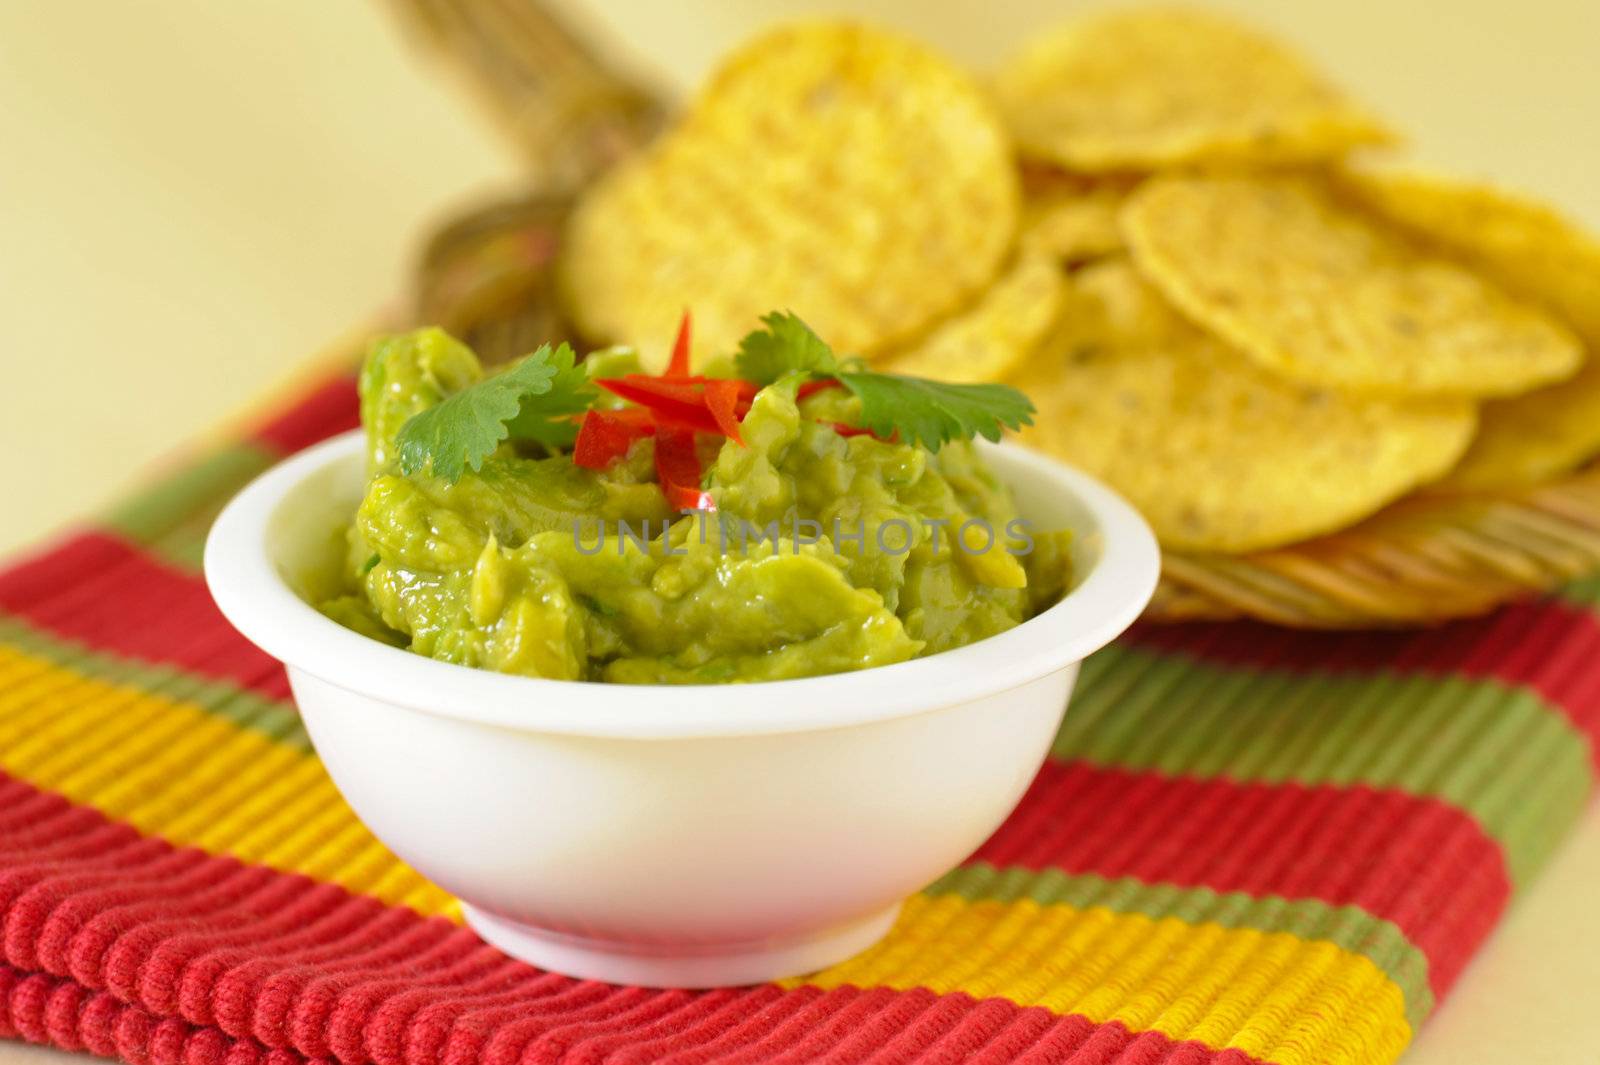 Fresh Made Guacamole by billberryphotography